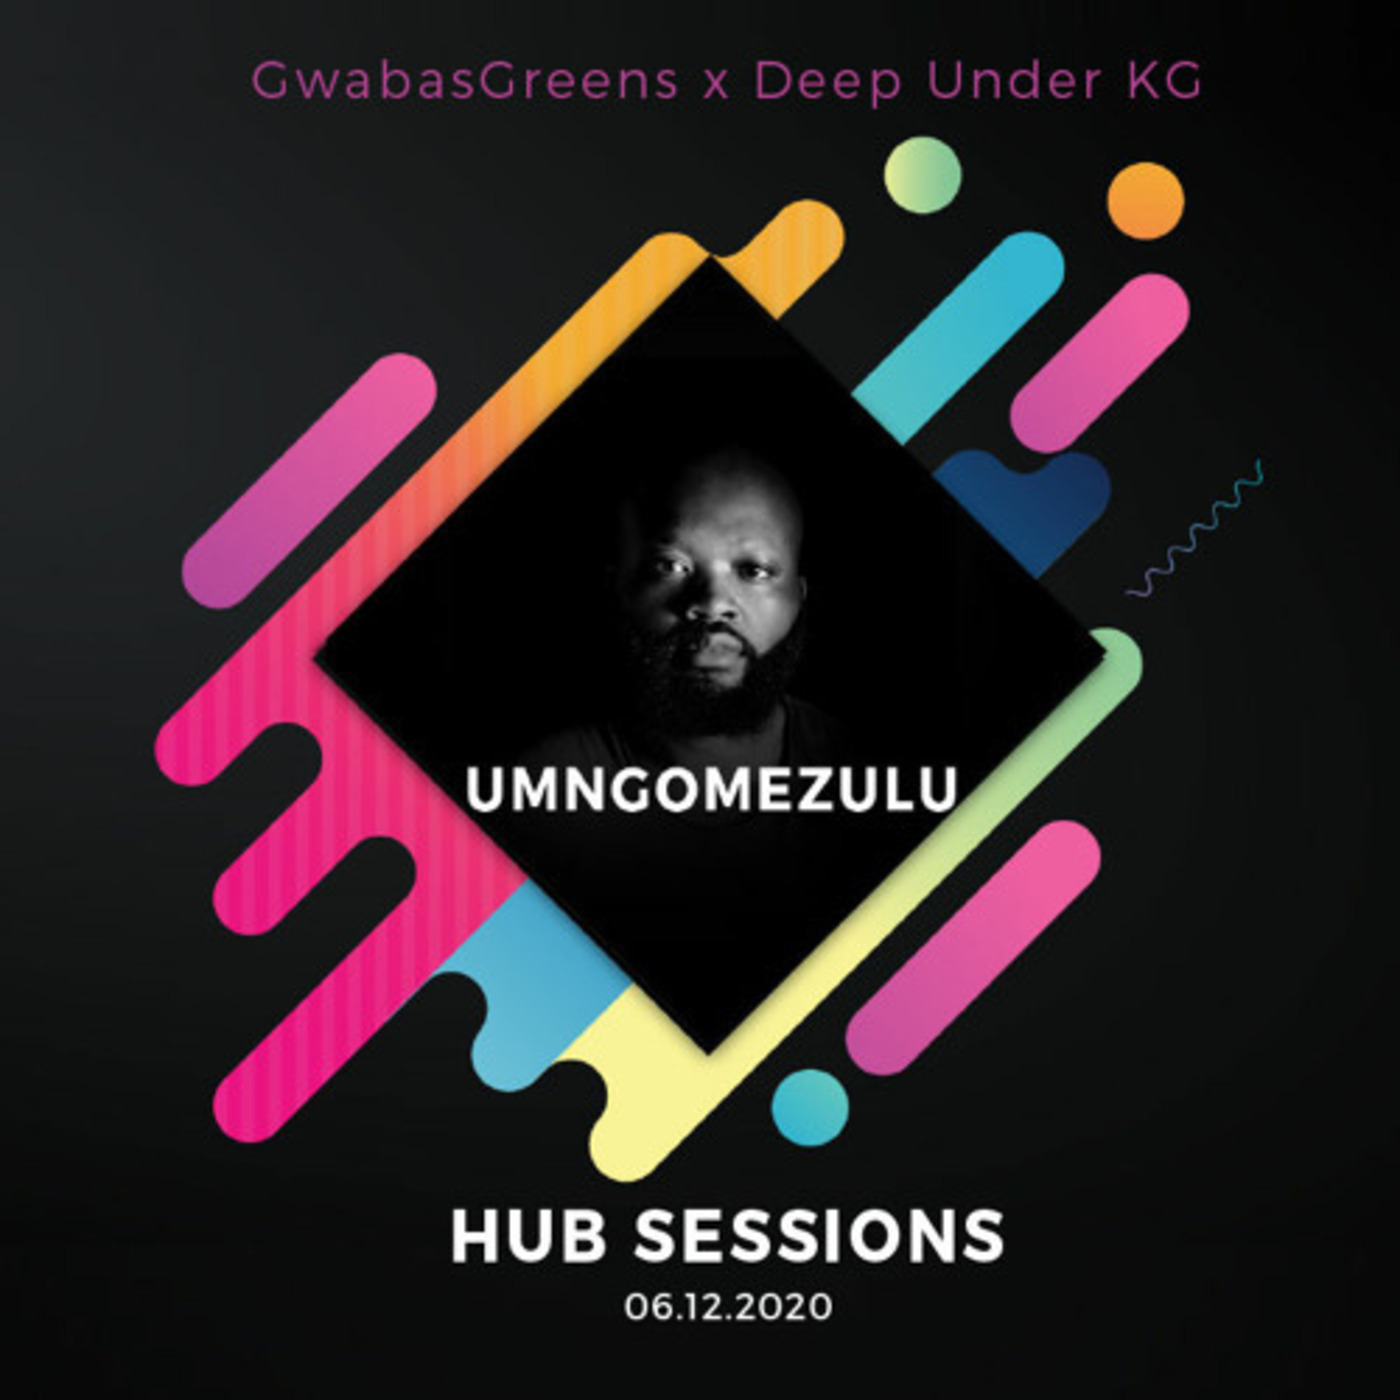 The Hub Sessions Mixed By UMngomezulu